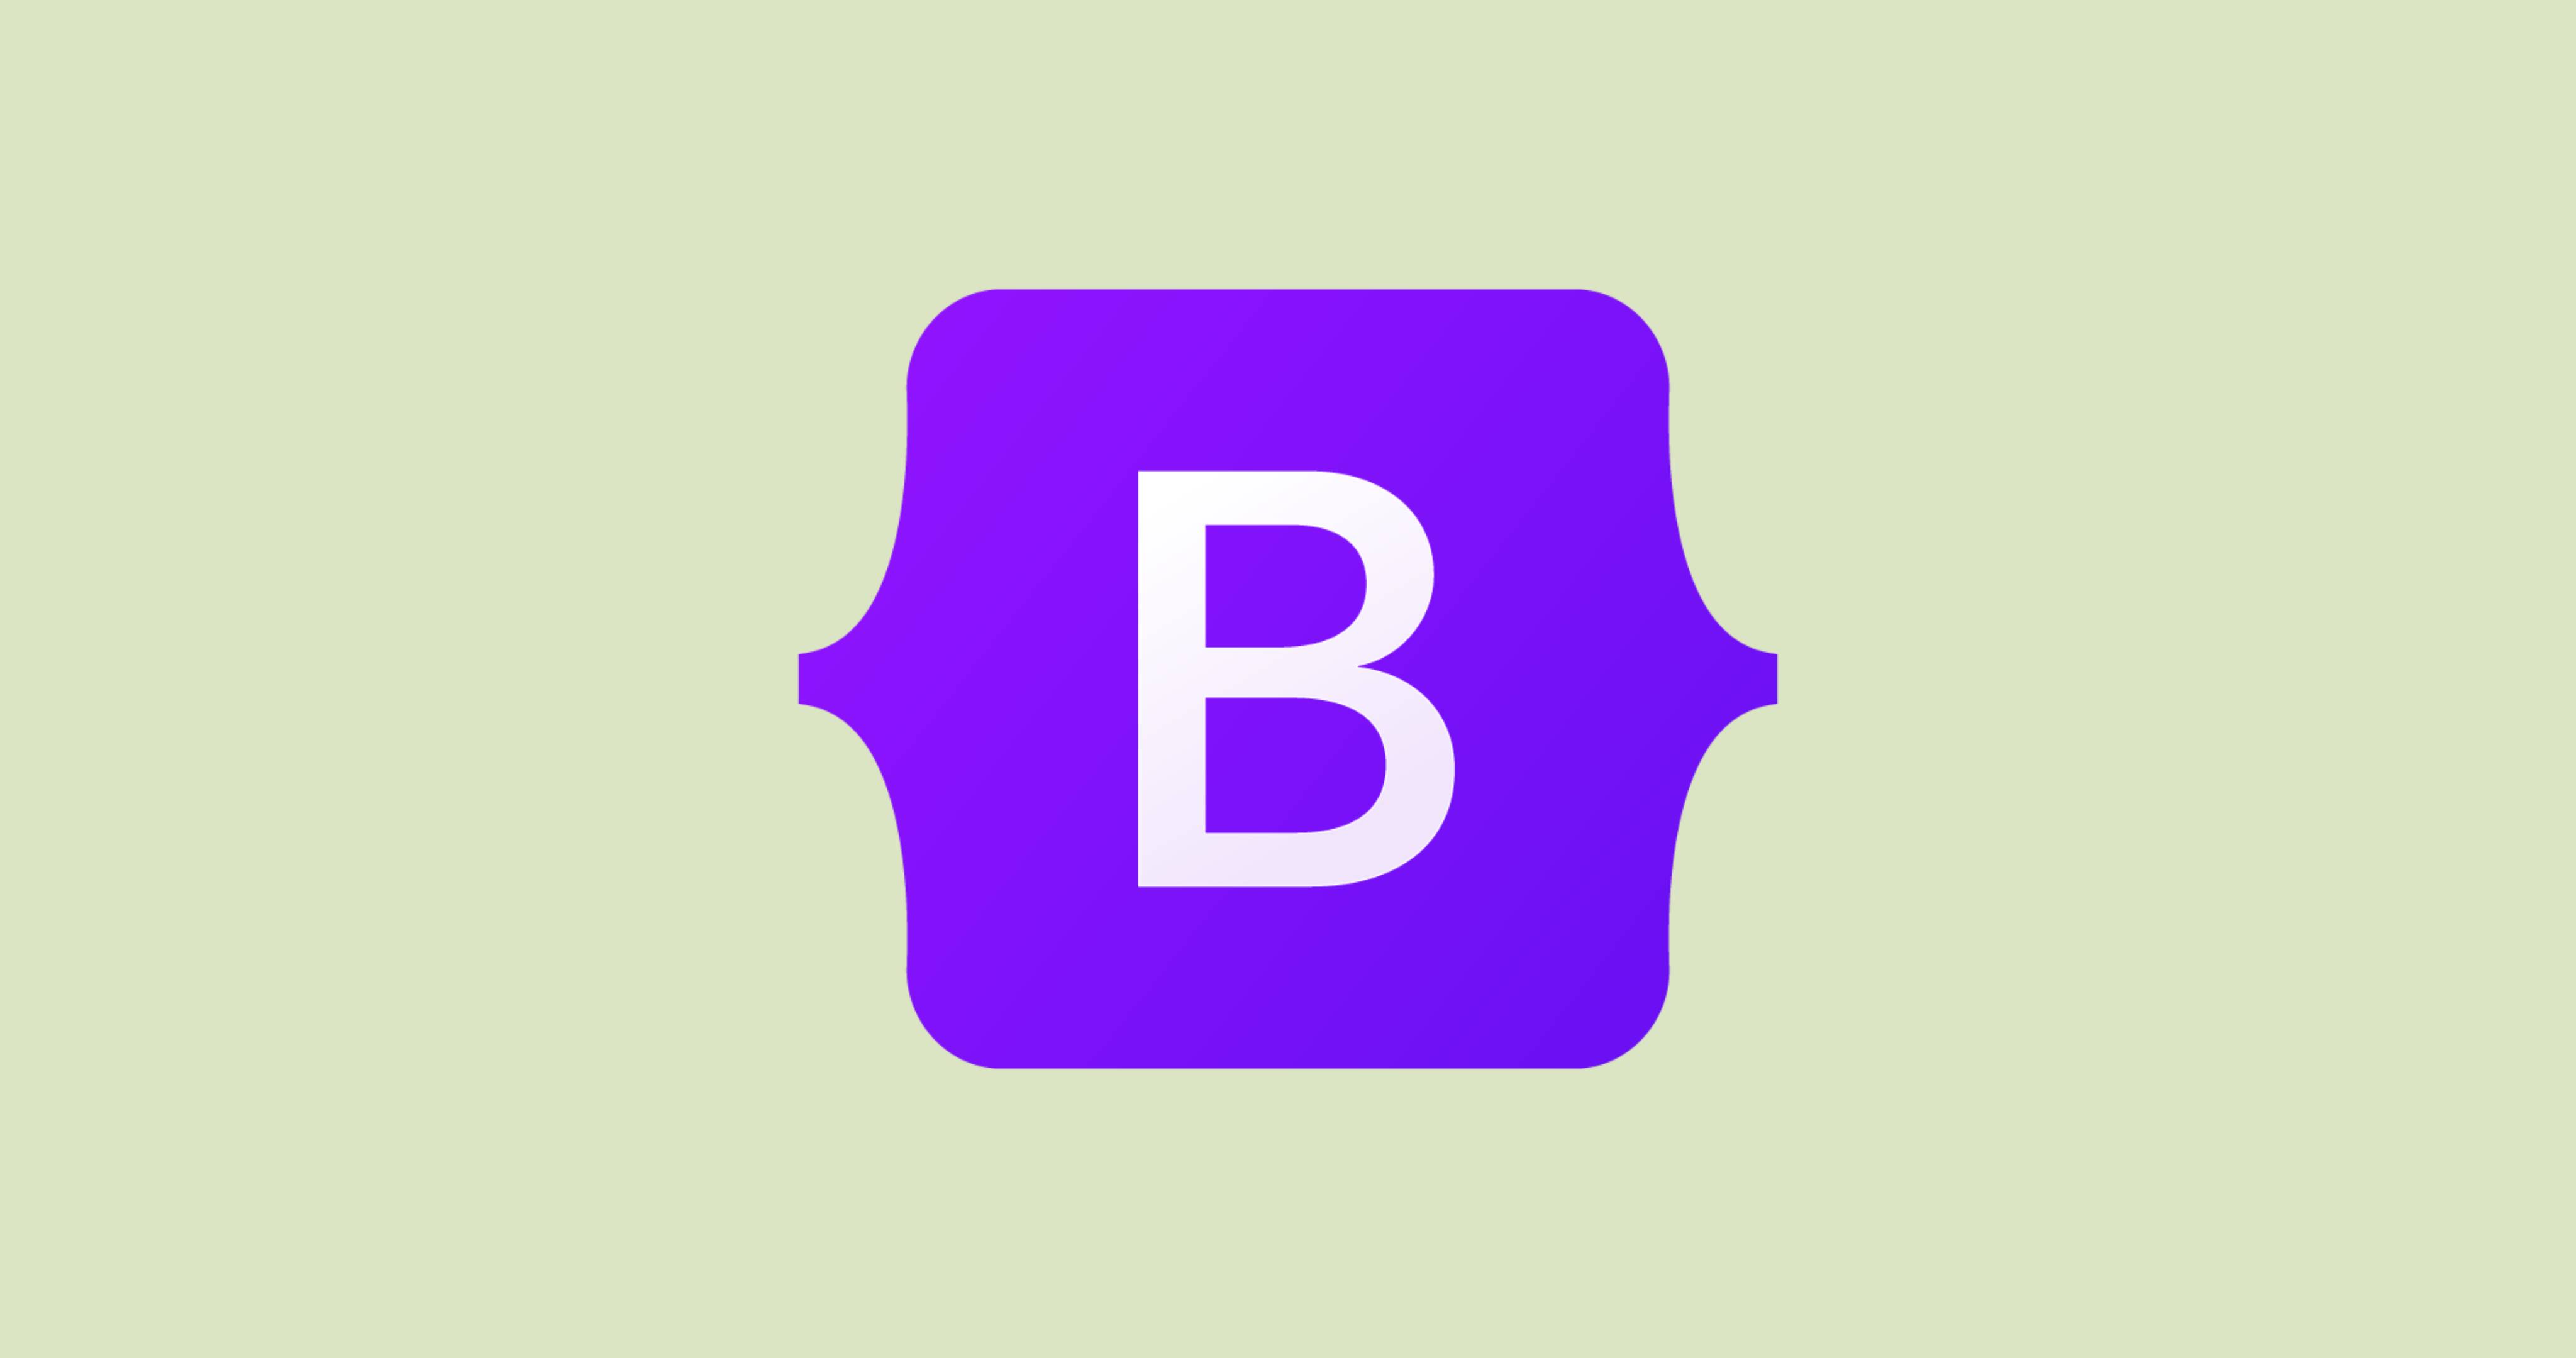 Bootstrap Made By Twitter